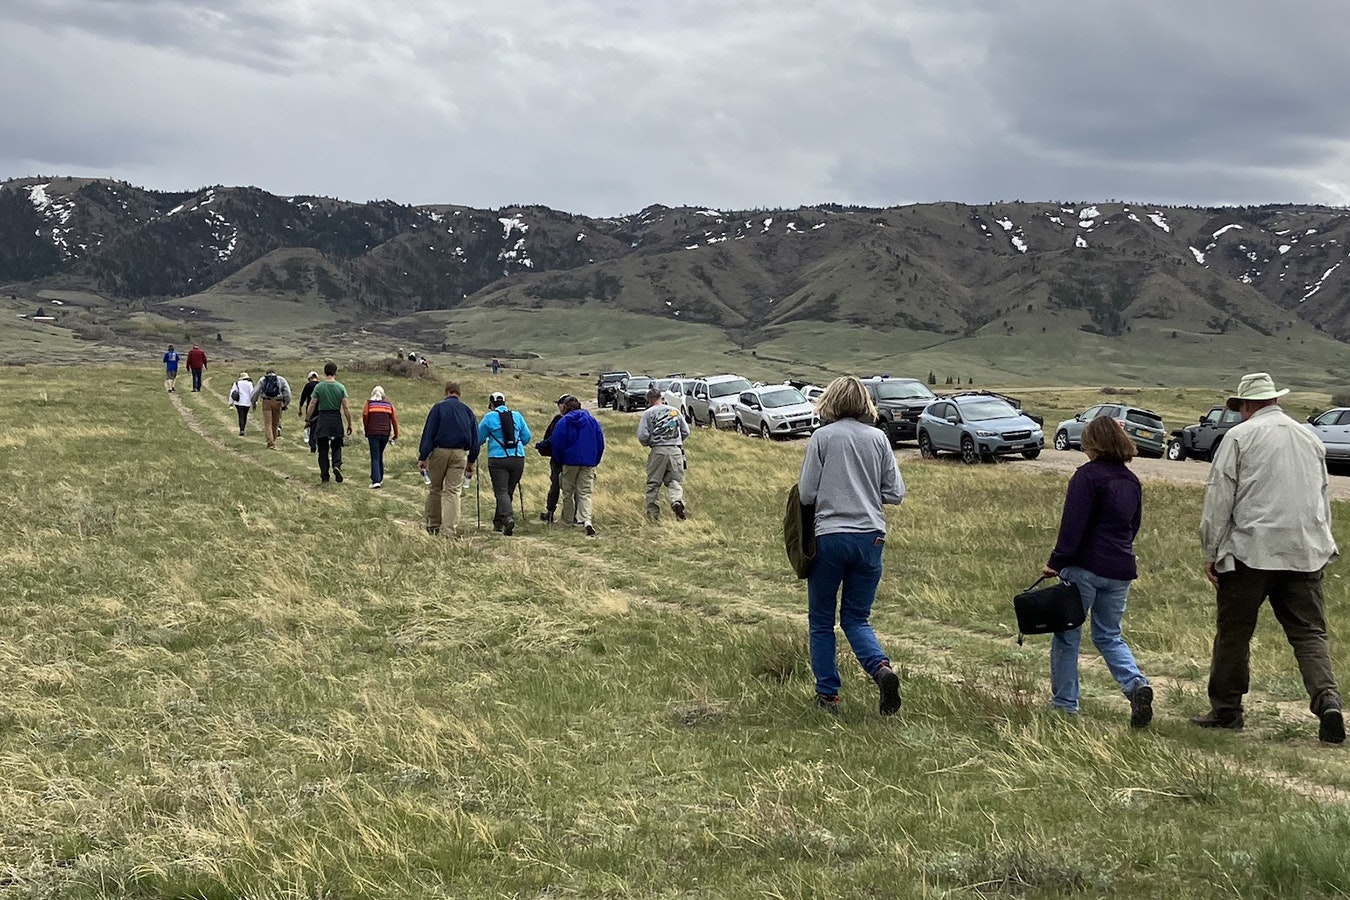 Many participants walked a 3 ½-mile trail through the School Section to see the nature and beauty of the land.